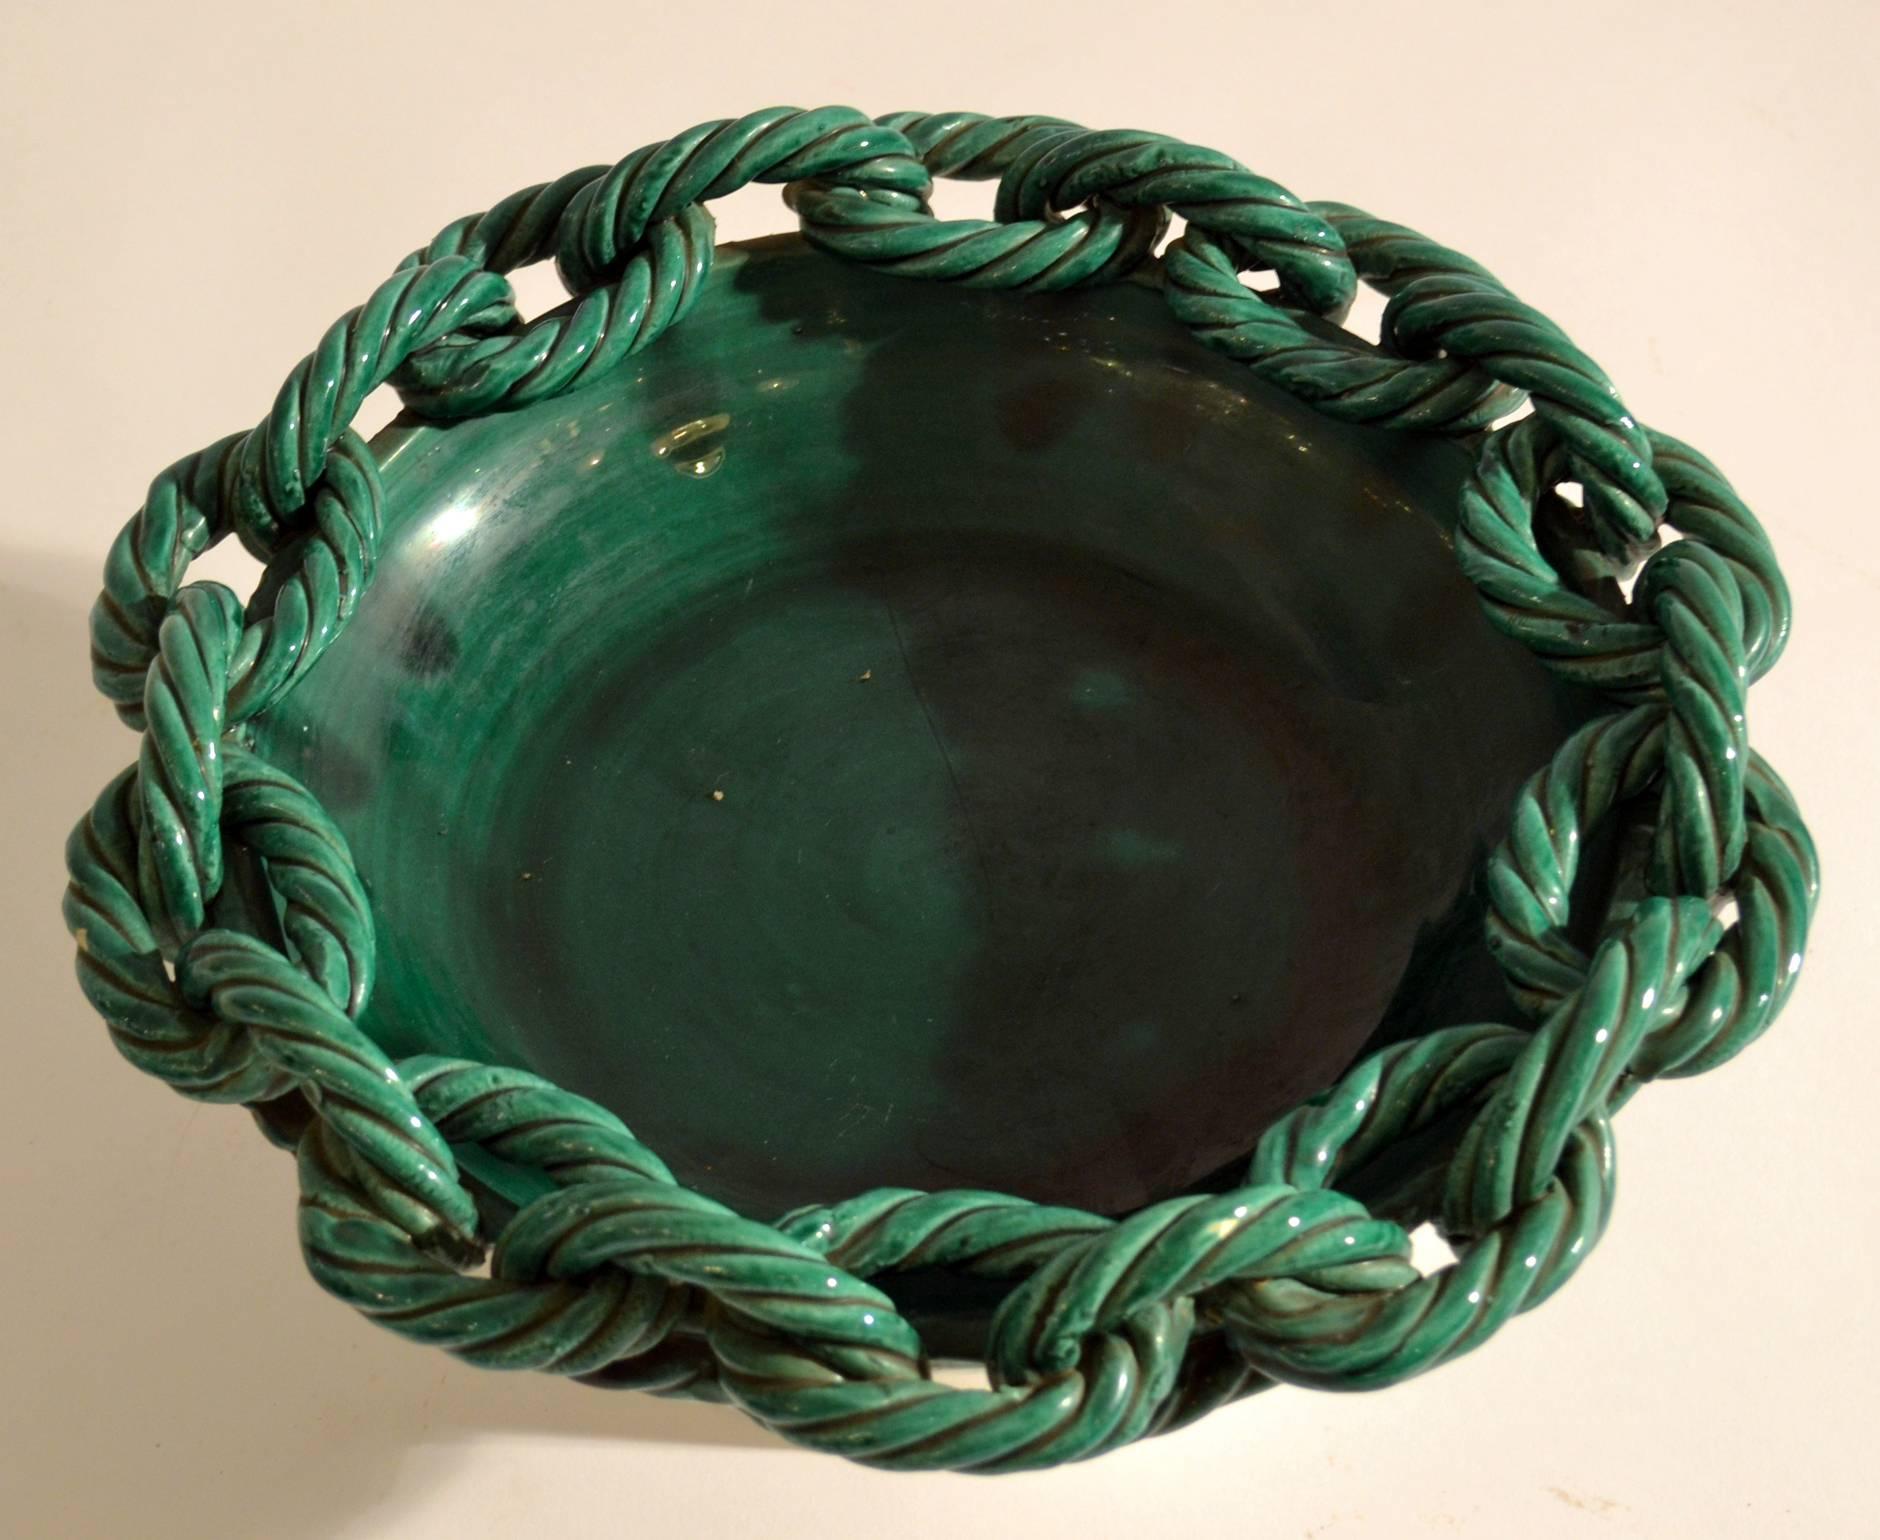 Mid-Century Modern 1950s Bowl in Emerald Green Ceramic with Chained Rope Edge by Vallauris, France